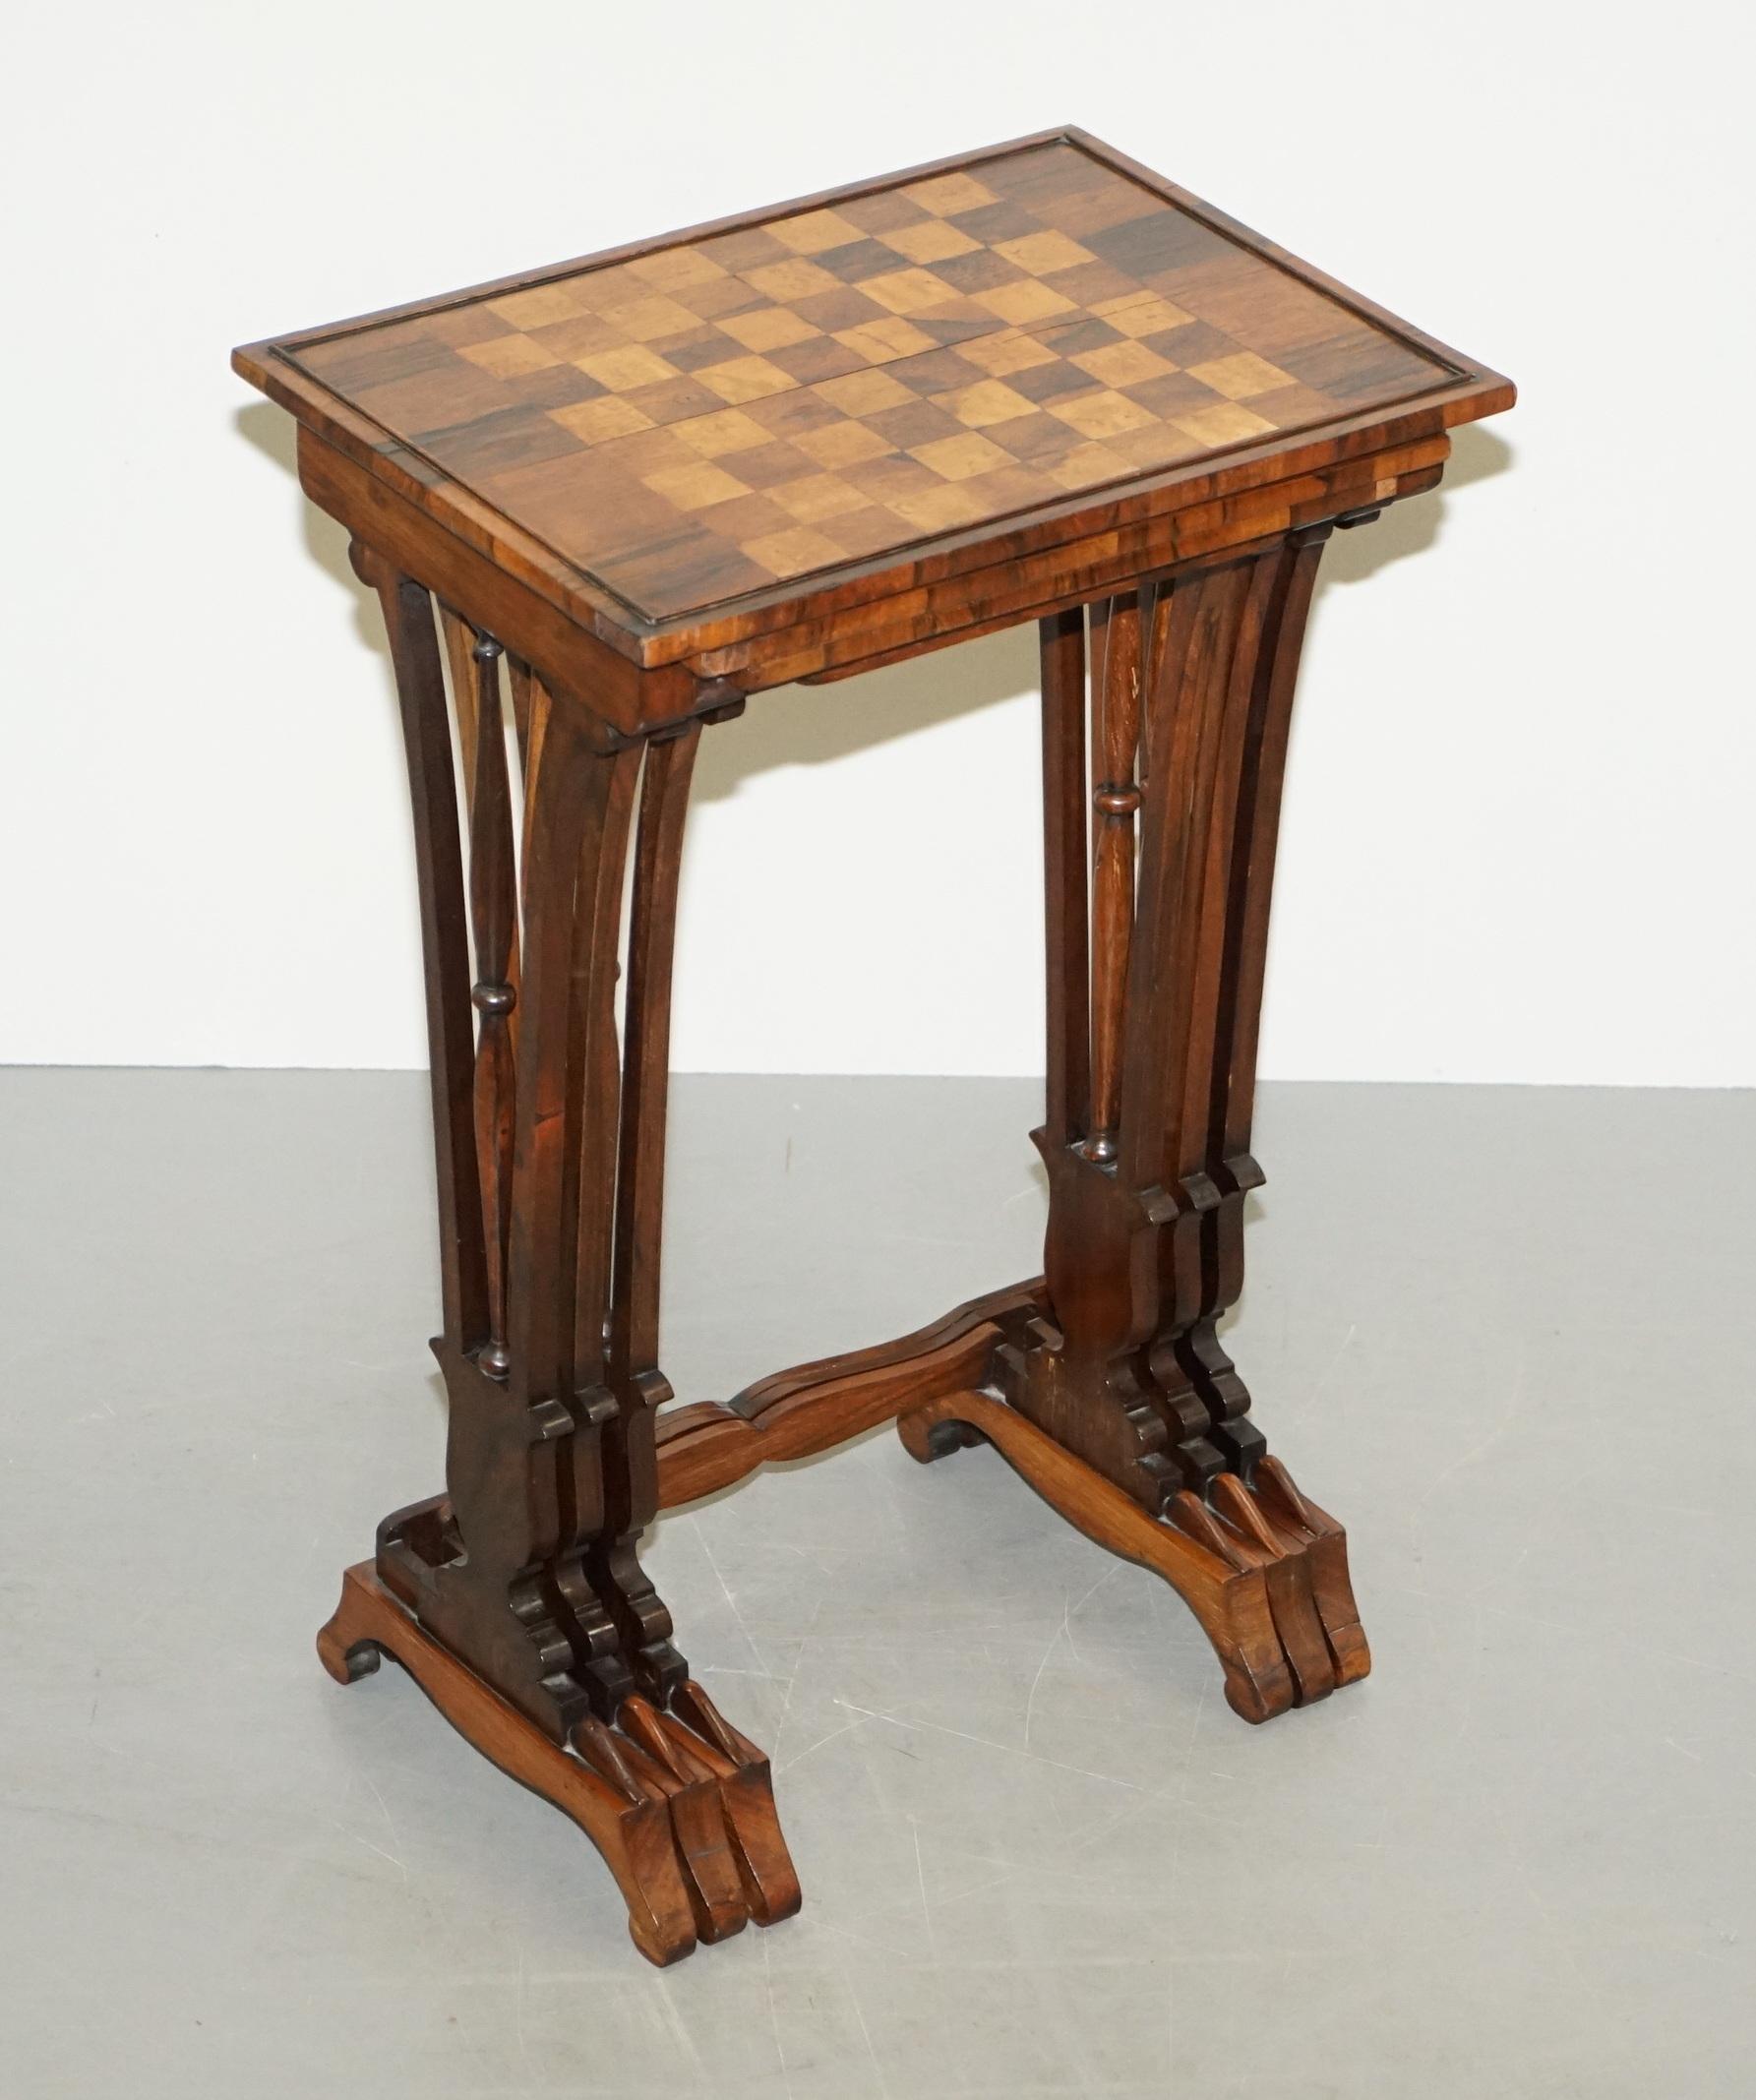 We are delighted to offer for sale this very fine Regency circa 1810-1820 Nest of tables in Hardwood attributed to Gillows of Lancaster 

A very fine nest, certainly made by Gillows, they are made from very fine hardwood and have the main table